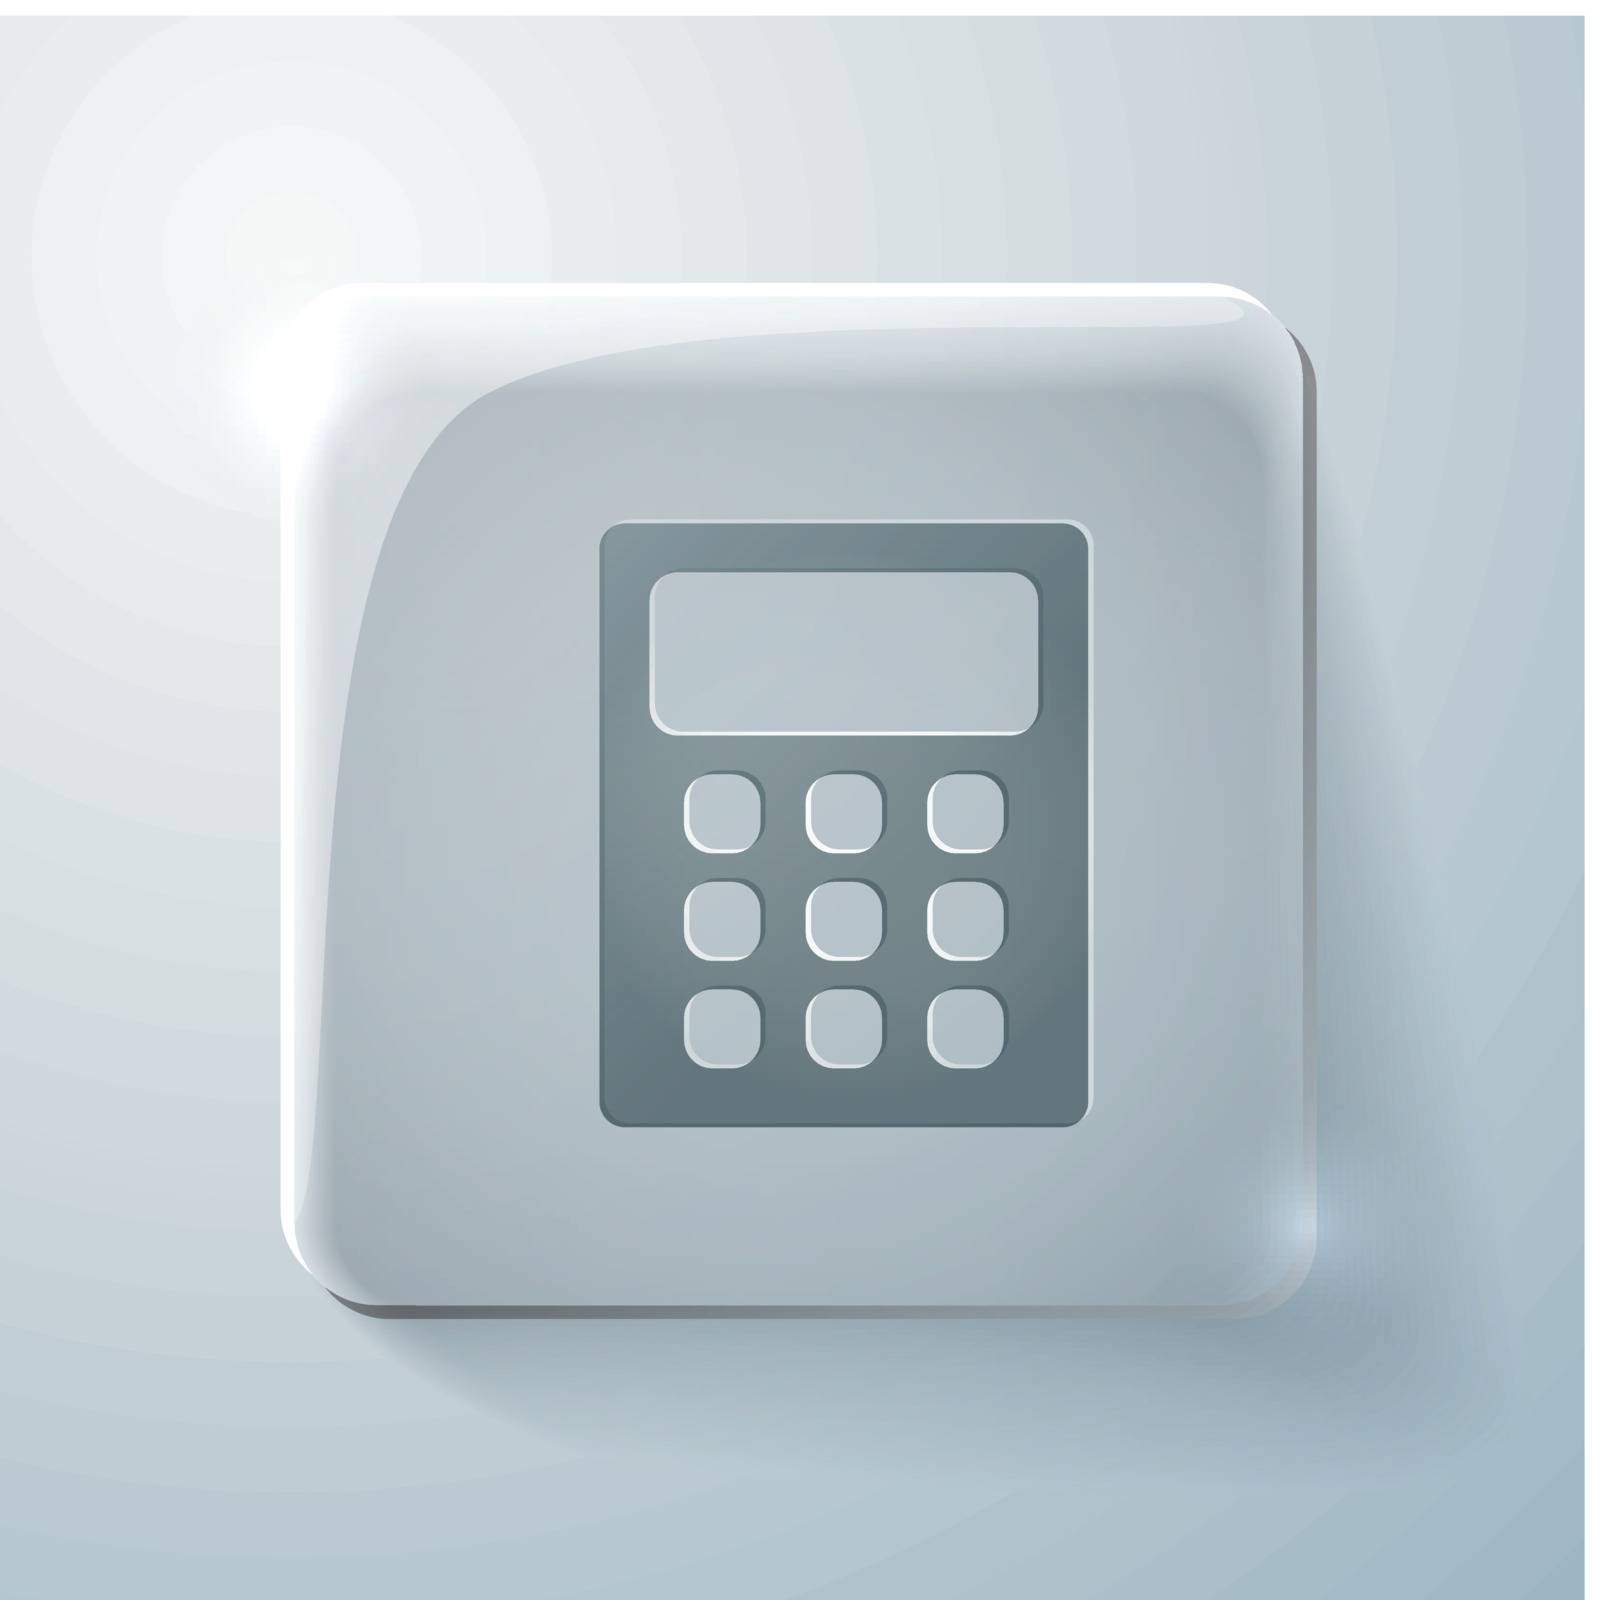 calculator. office  sign. Glass square icon with highlights